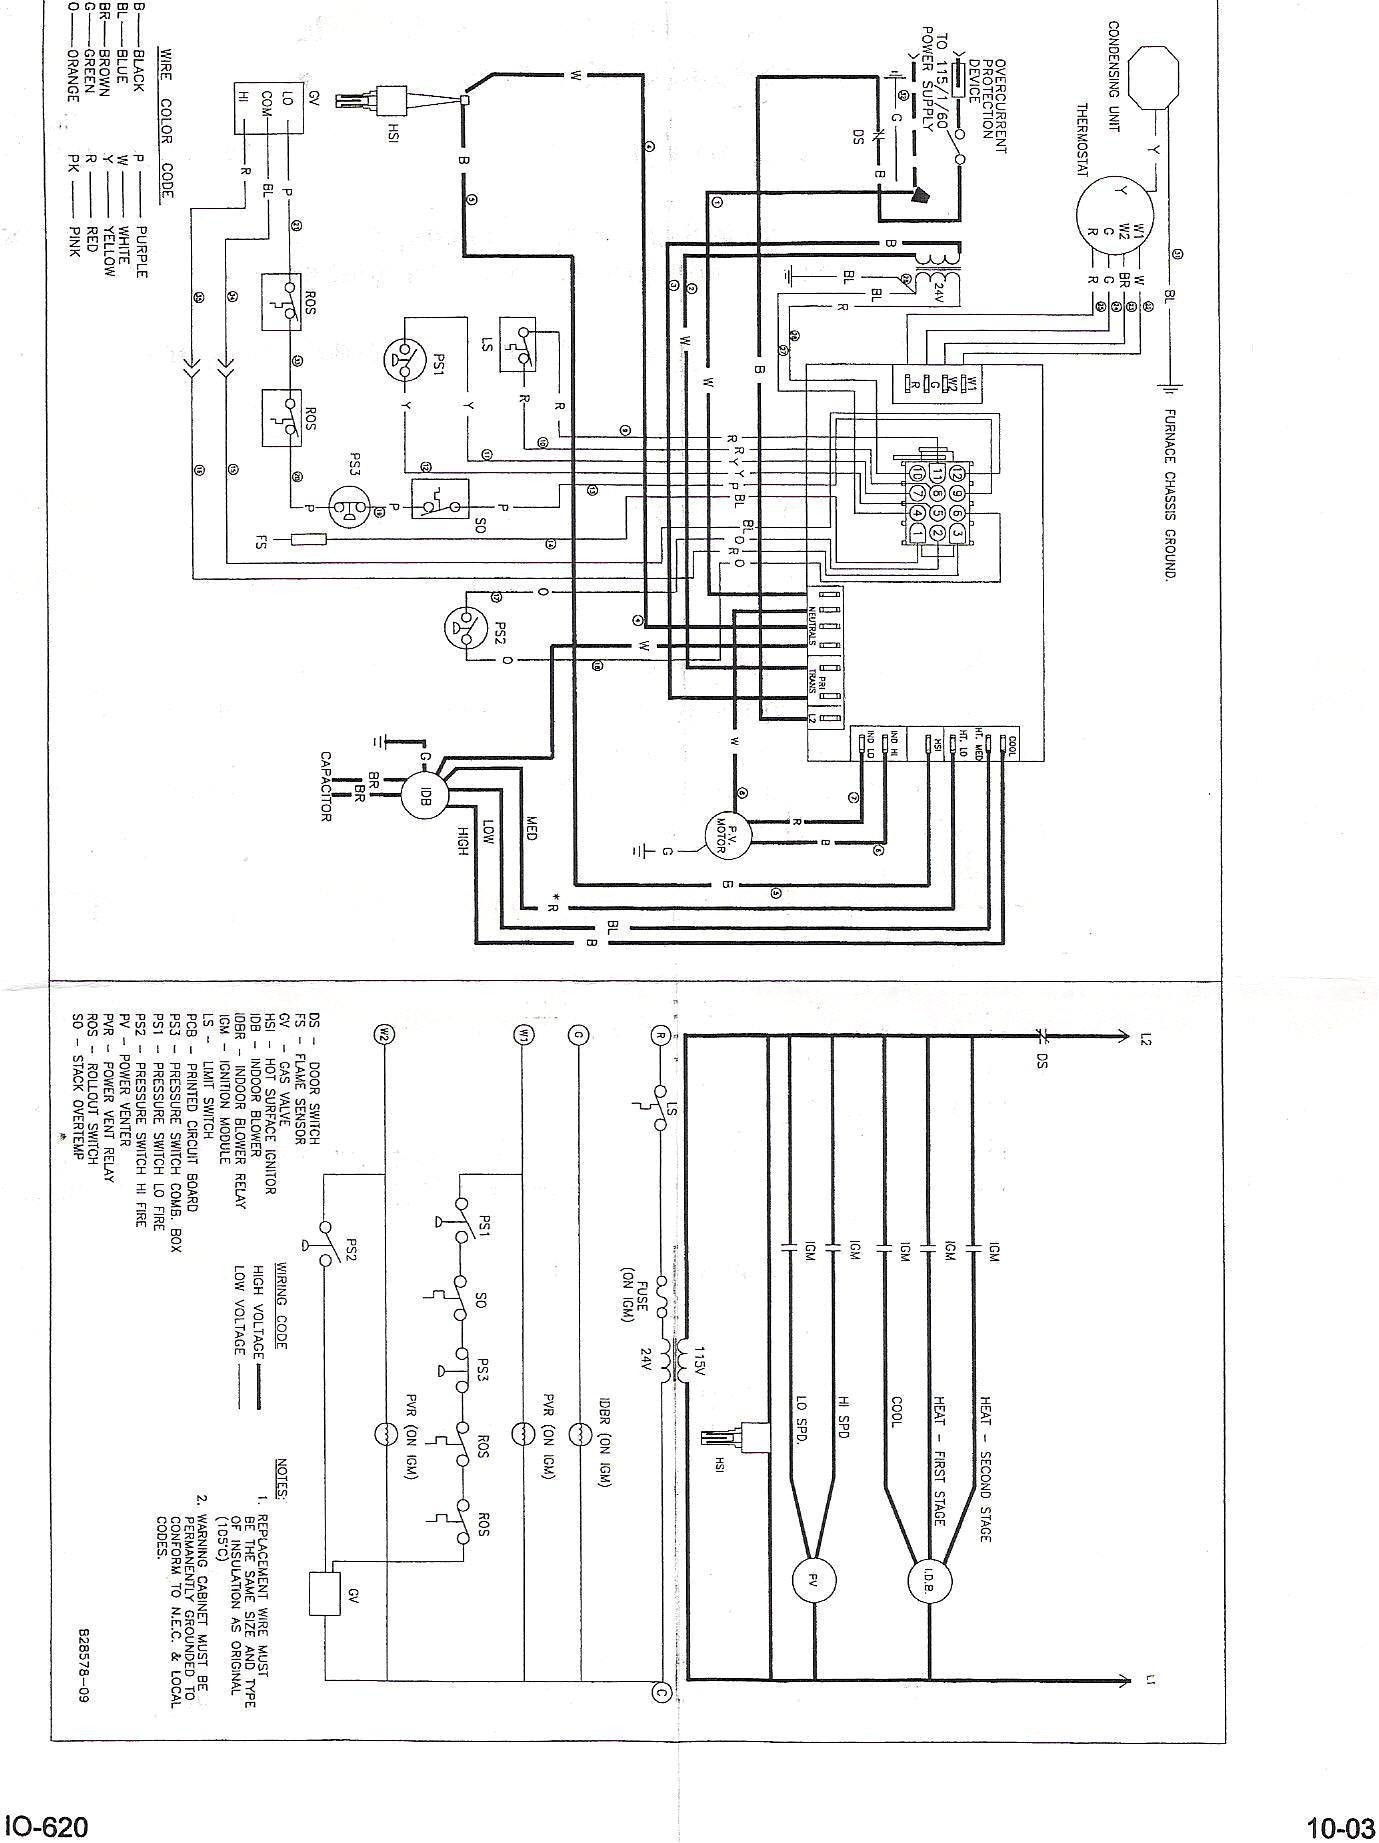 Lennox Furnace Wiring Diagram 2018 Wiring Diagram For Lennox Gas Furnace Refrence Ruud Air Conditioning